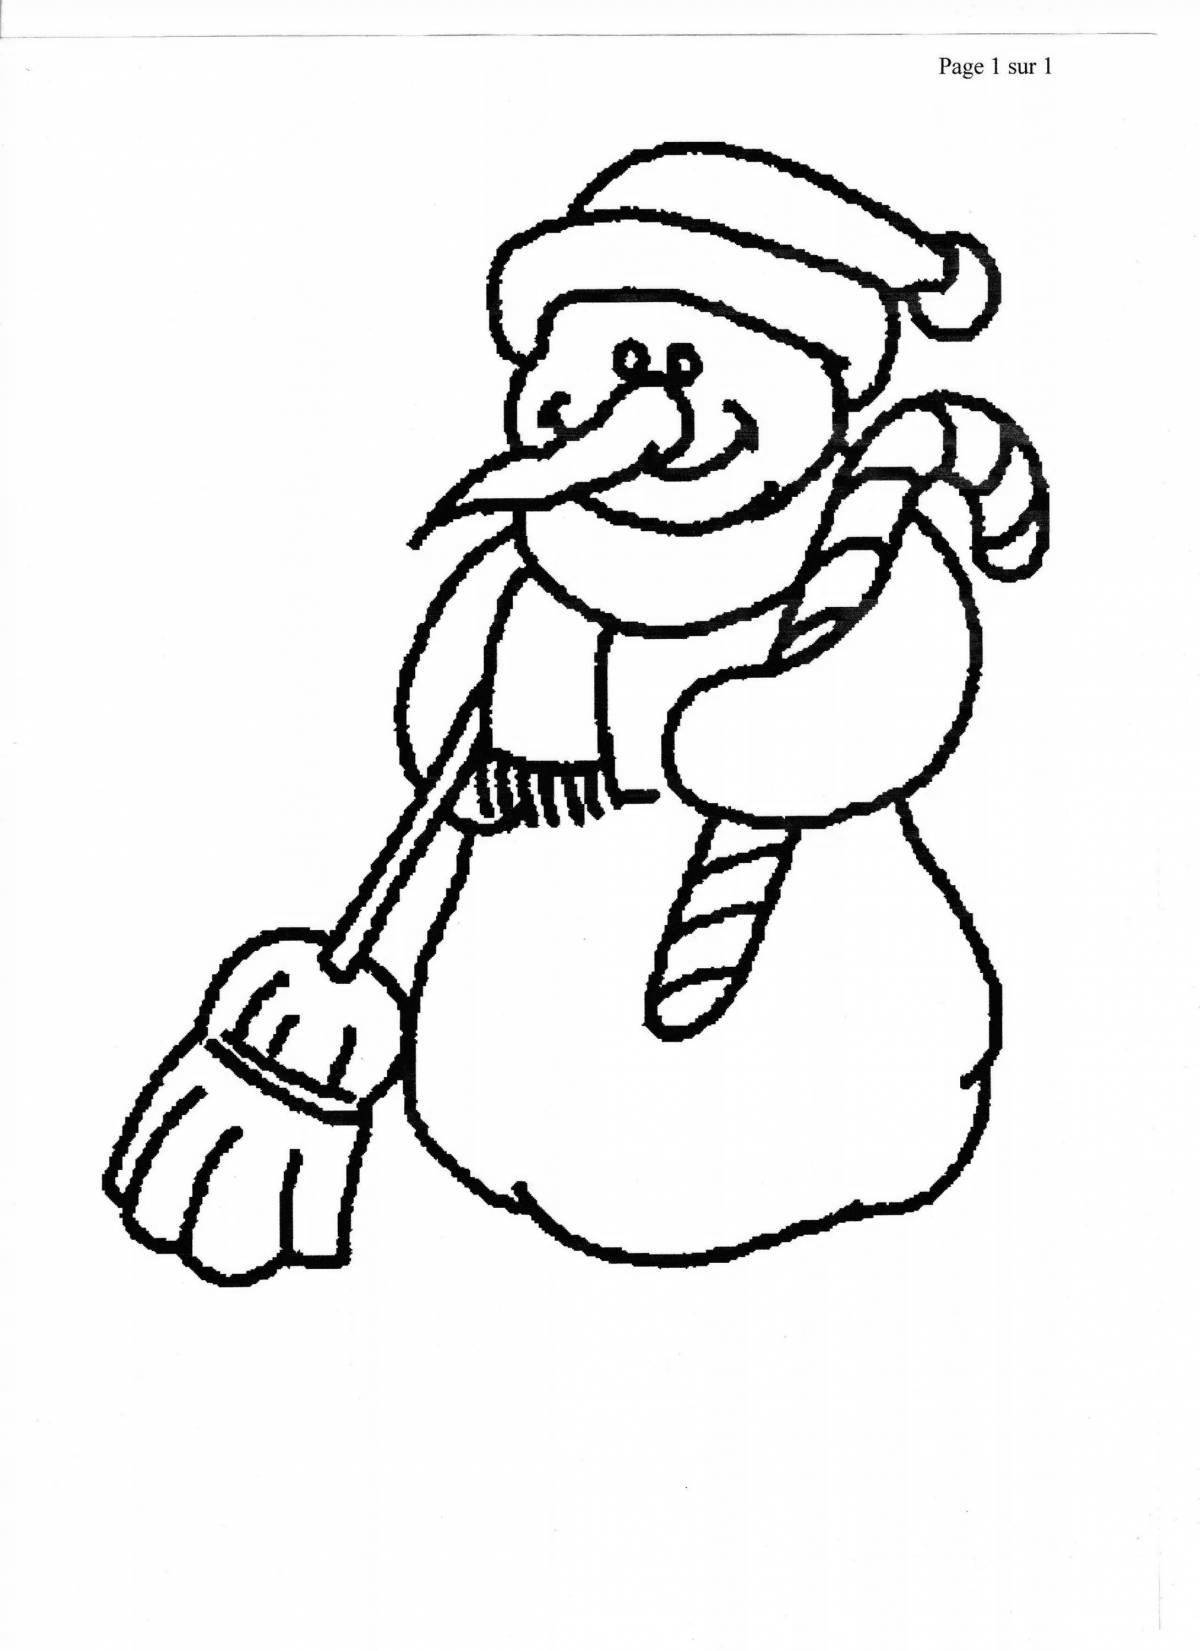 Witty coloring book snowman with a broom